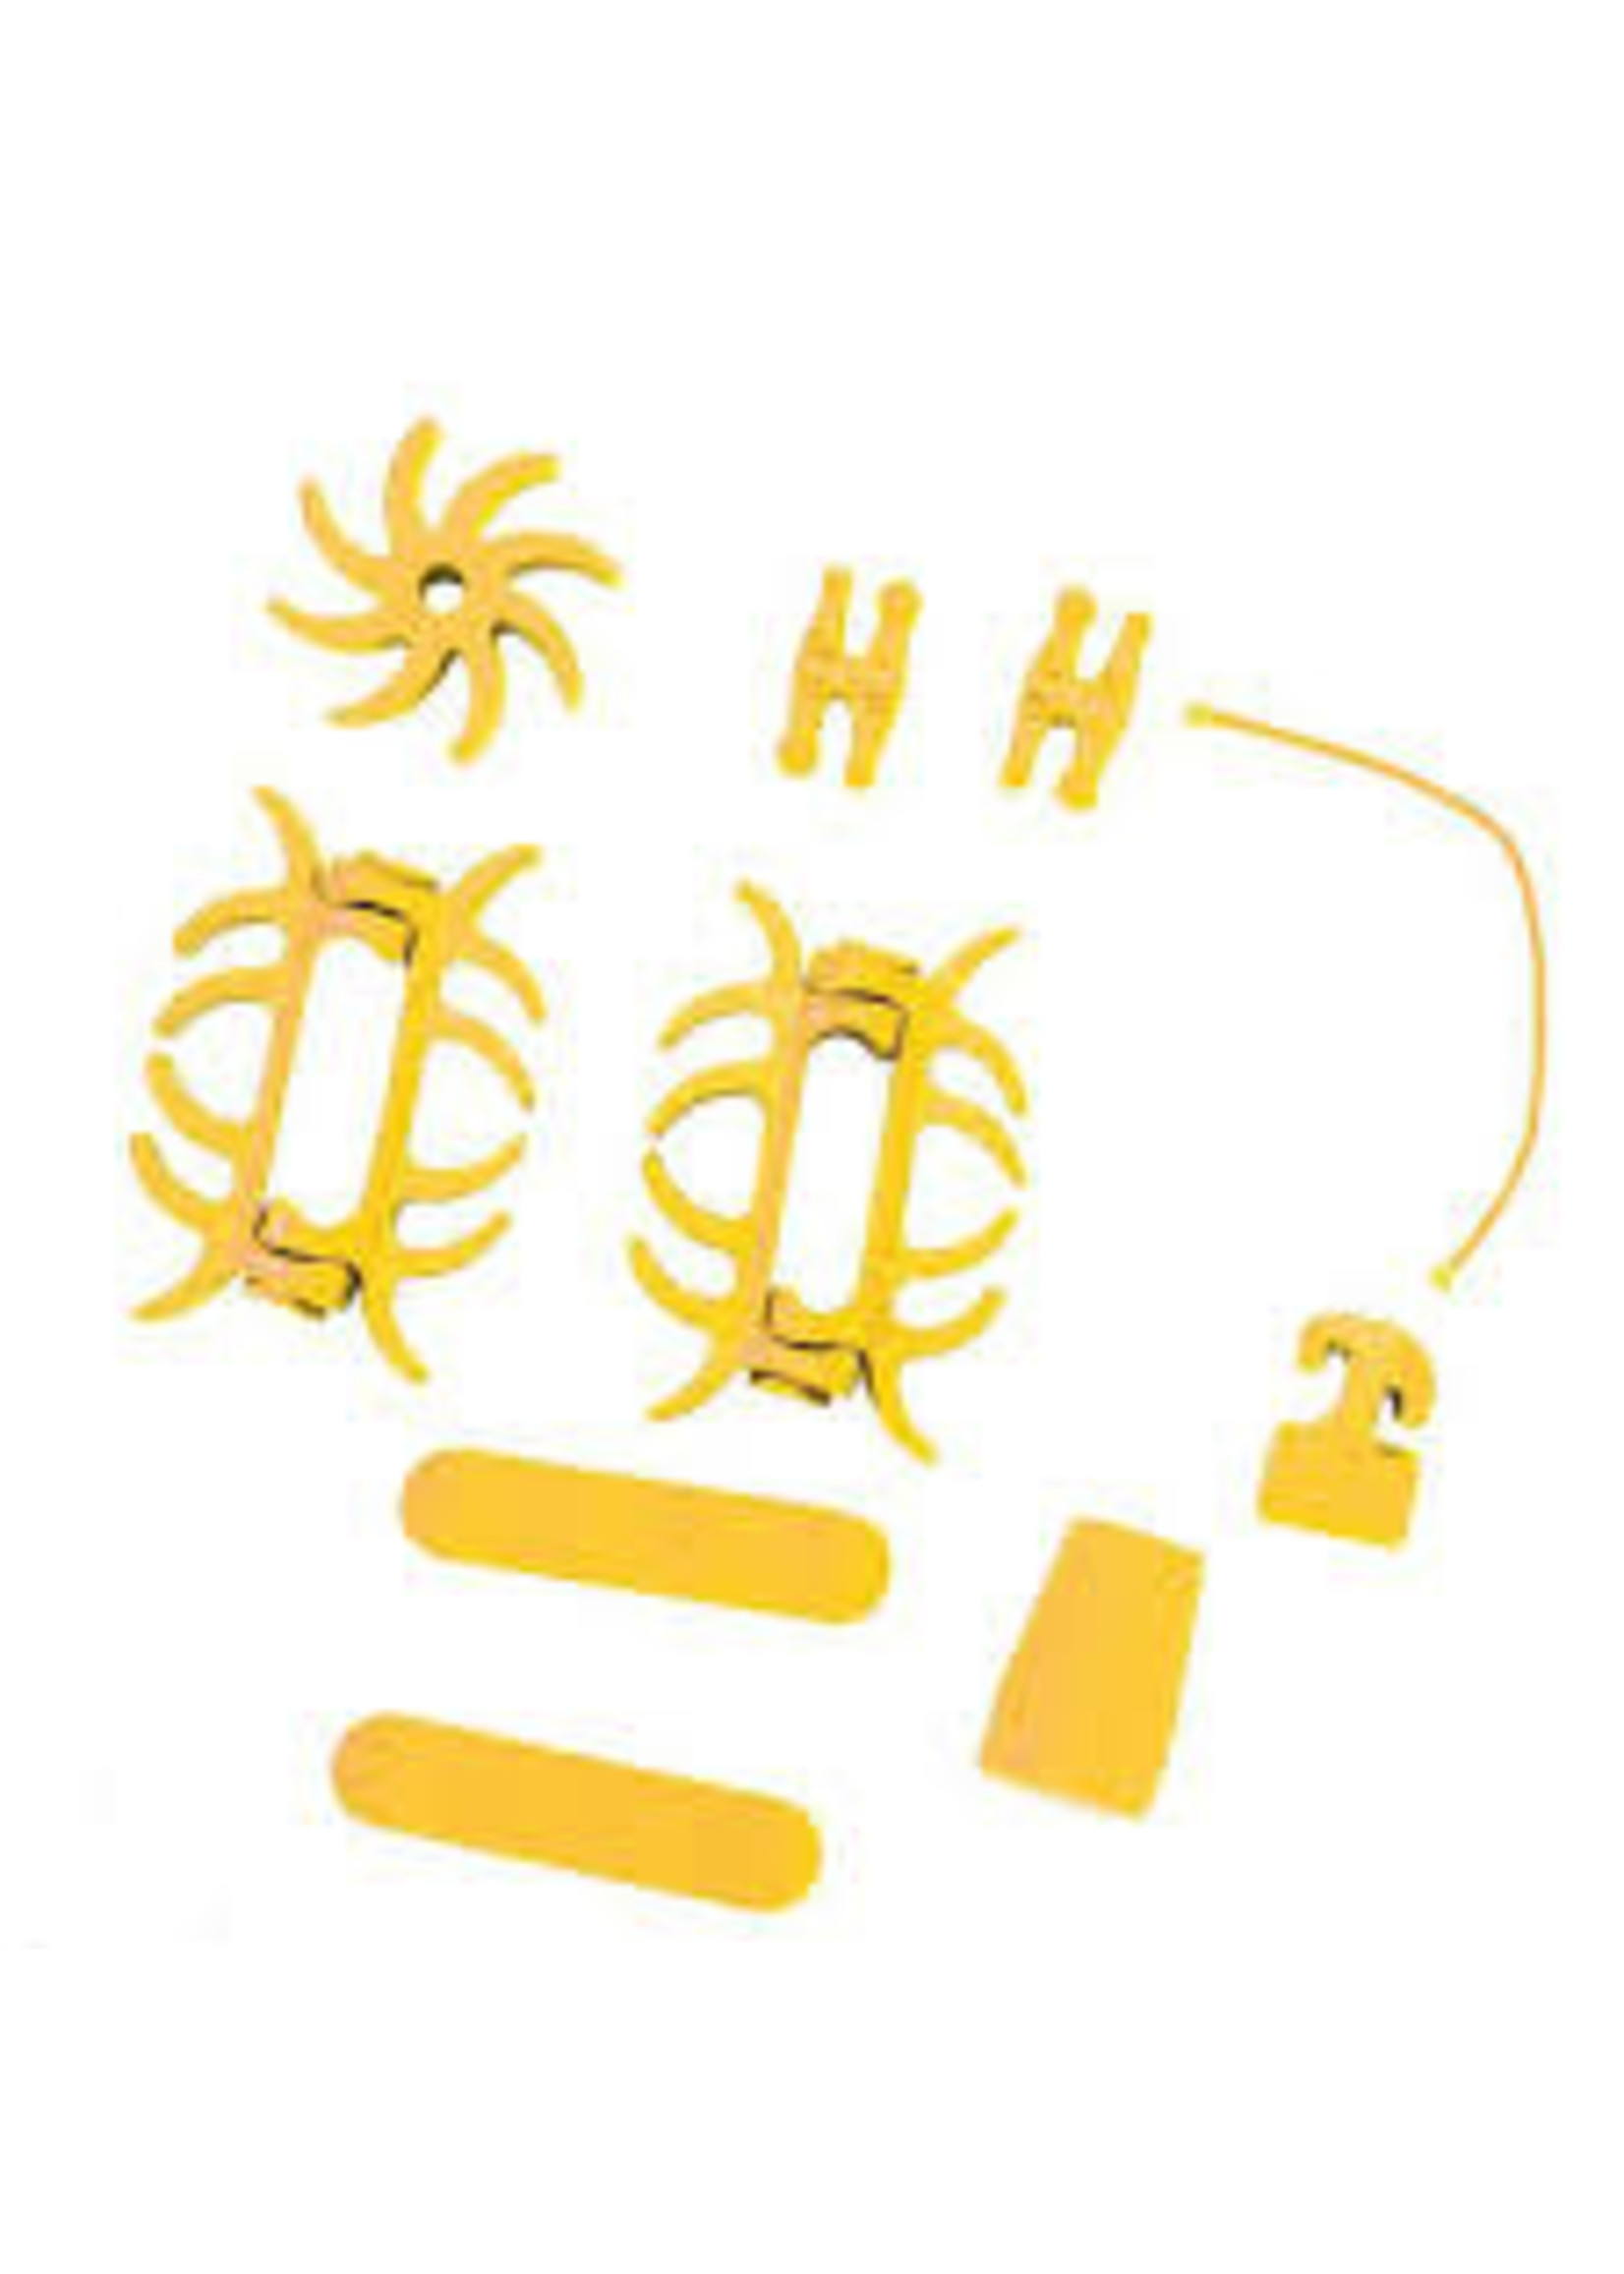 P.S.E PSE COLOR KIT YELLOW COLOR DAMPERS